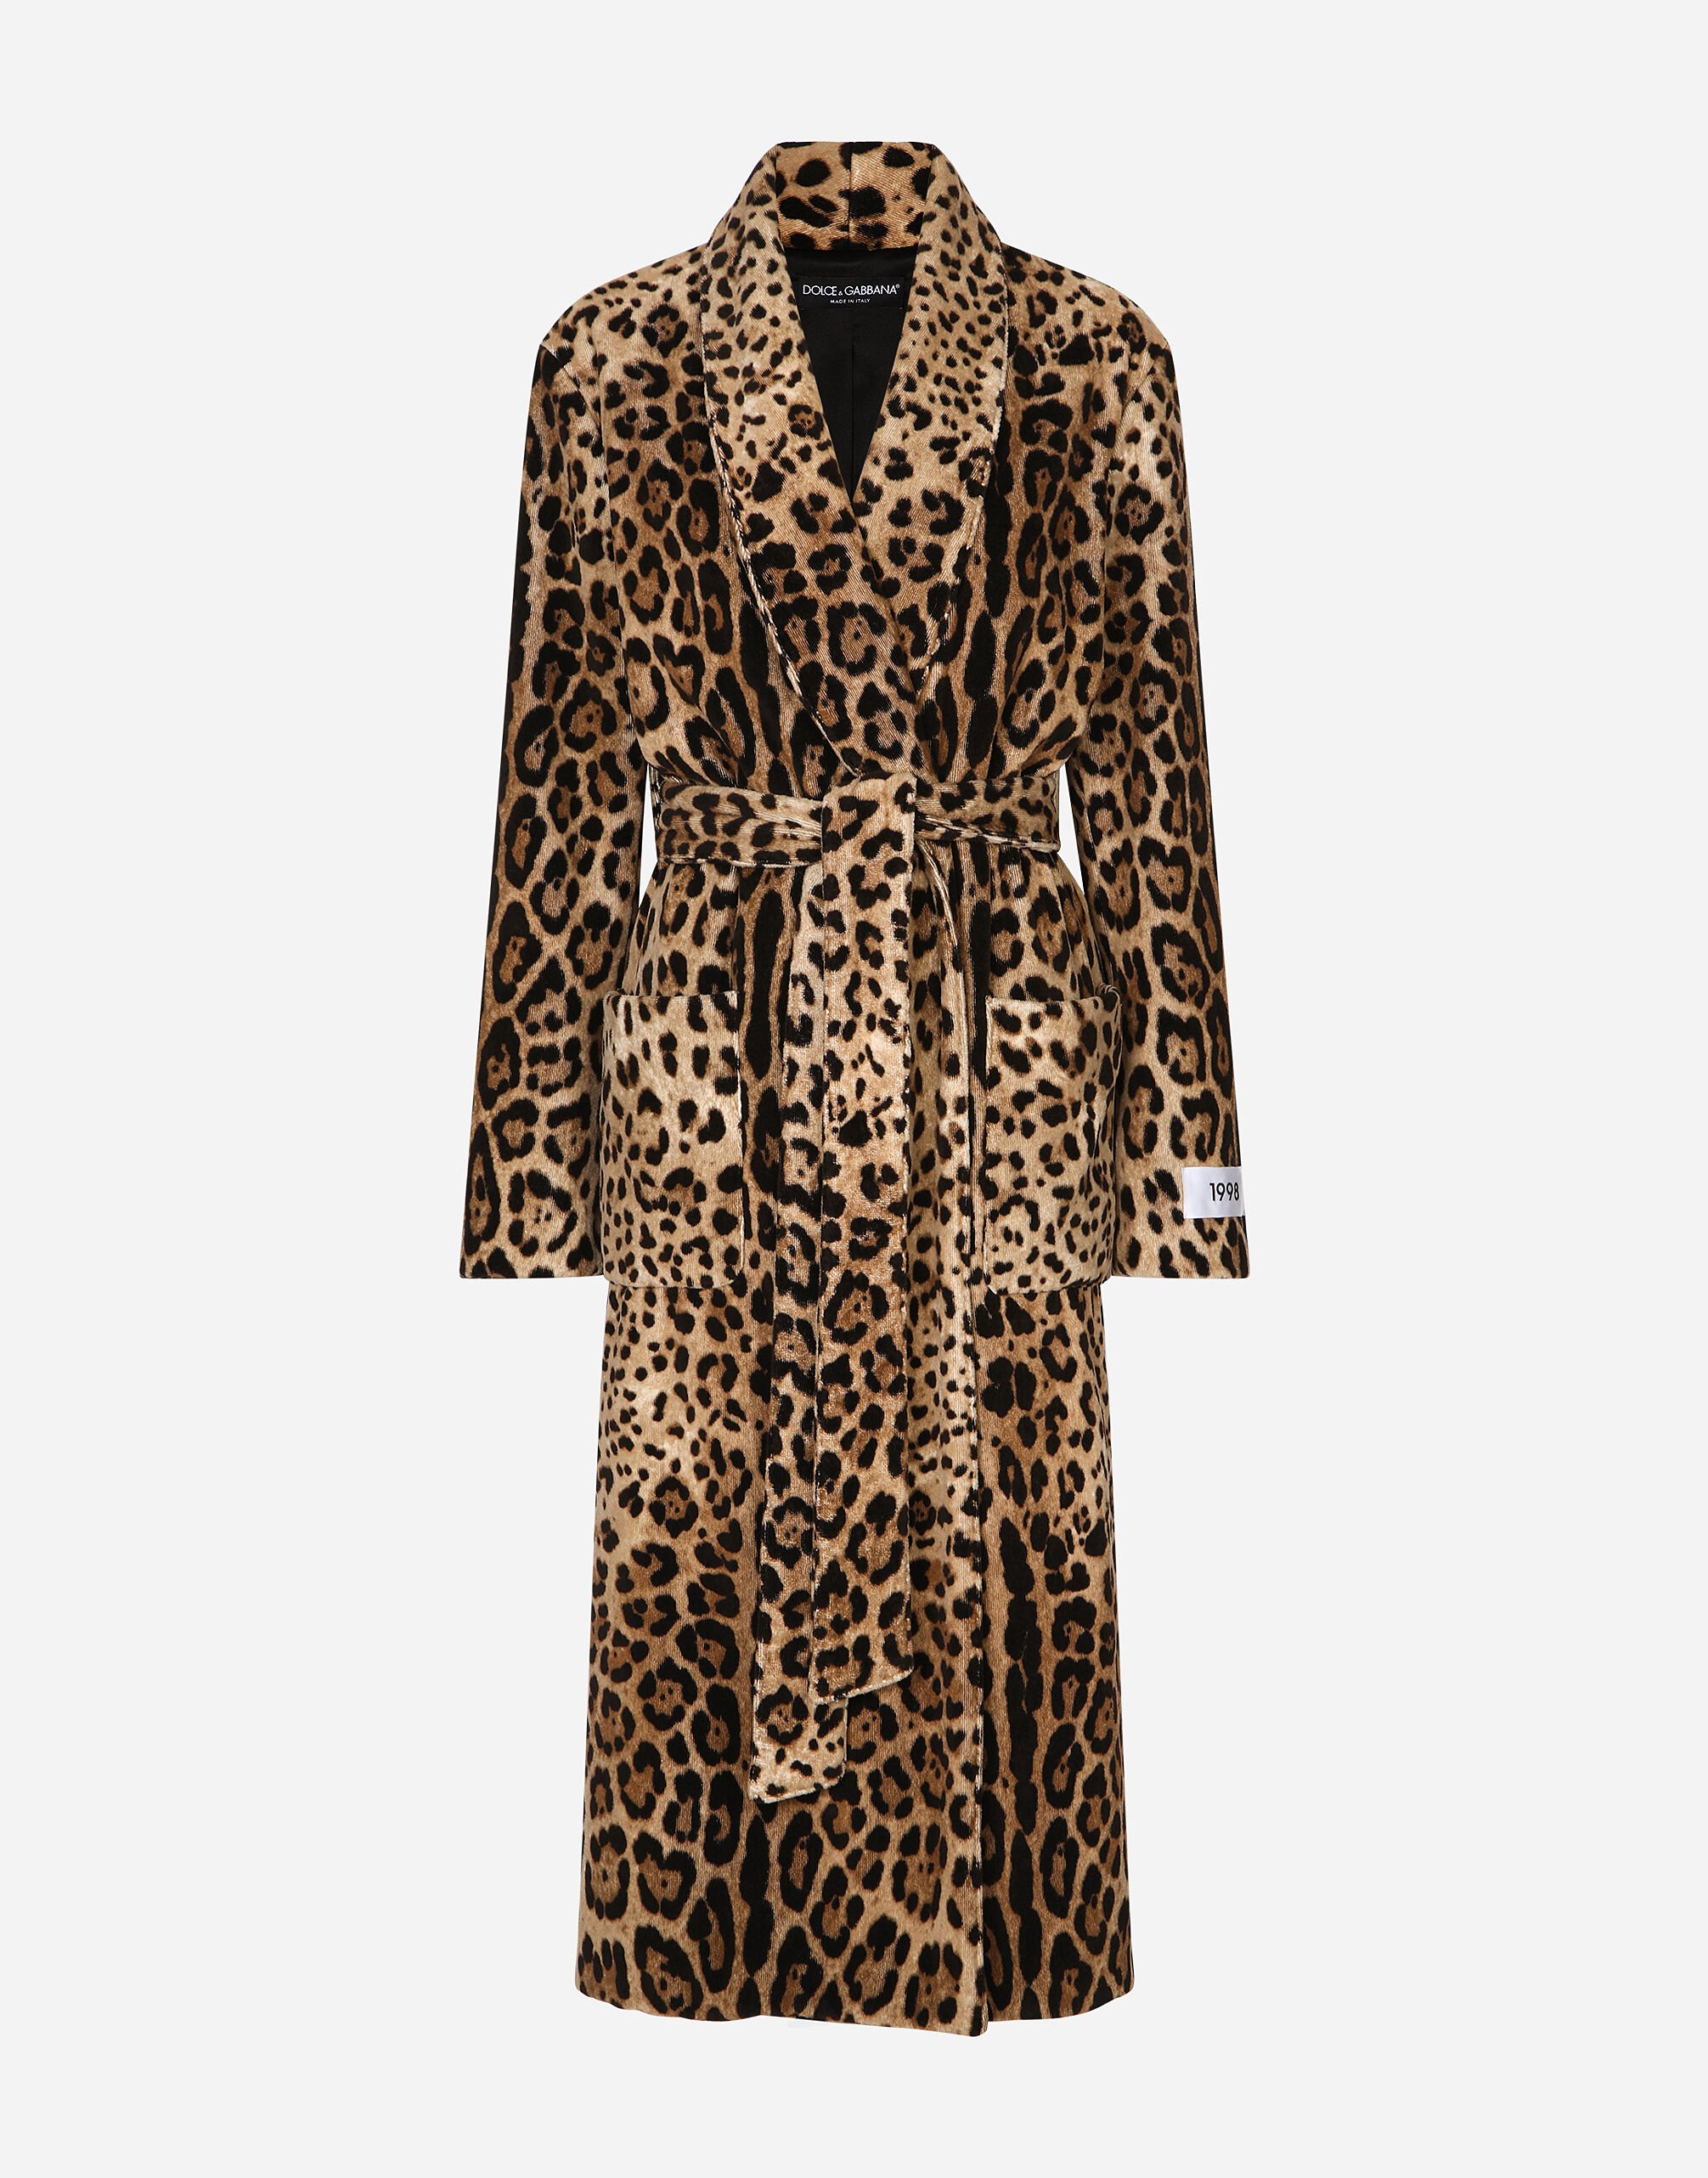 Dolce & Gabbana KIM DOLCE&GABBANA Leopard-print terrycloth coat with belt and the Re-Edition label Black F9P52LHULRK